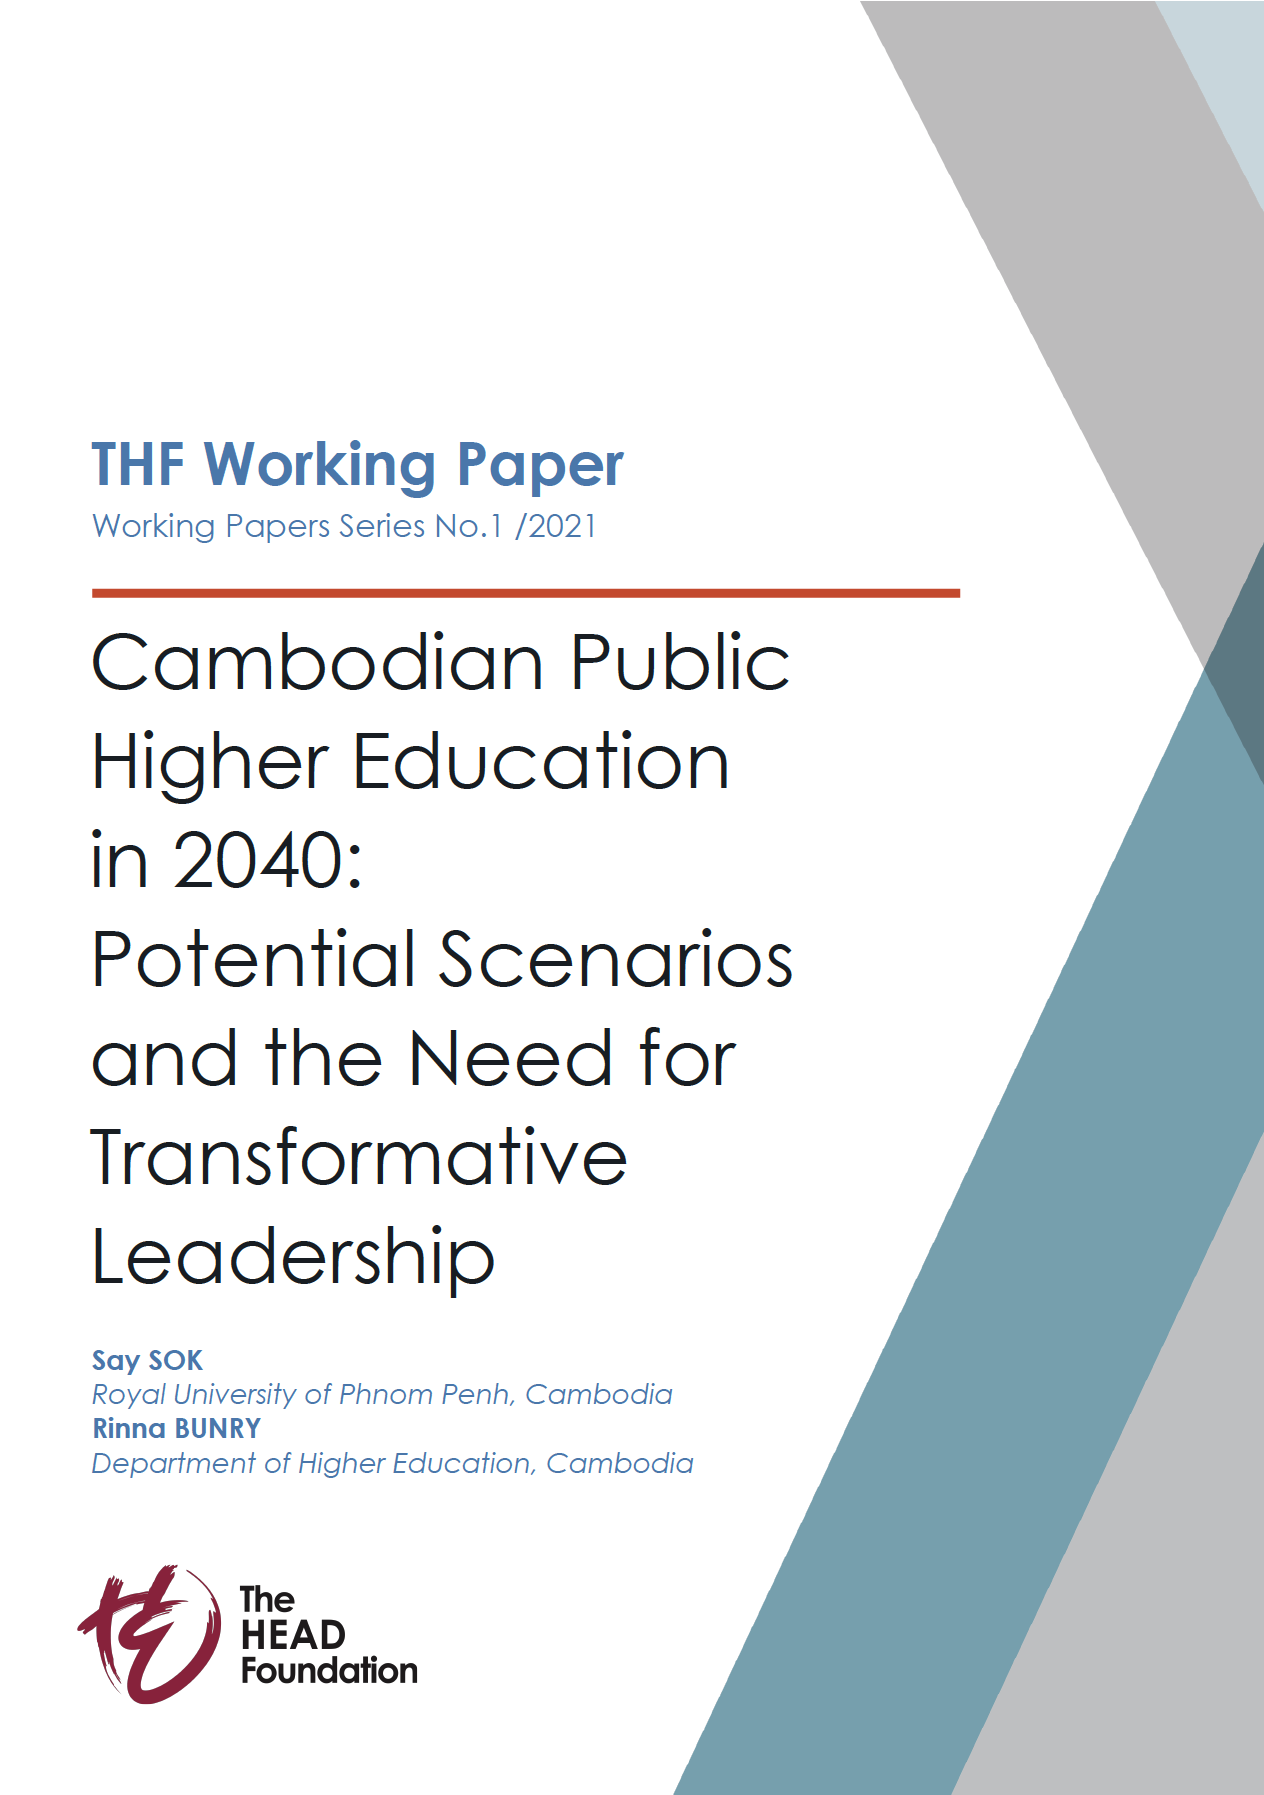 thf papers_2021_Cambodian Public Higher Education in 2040